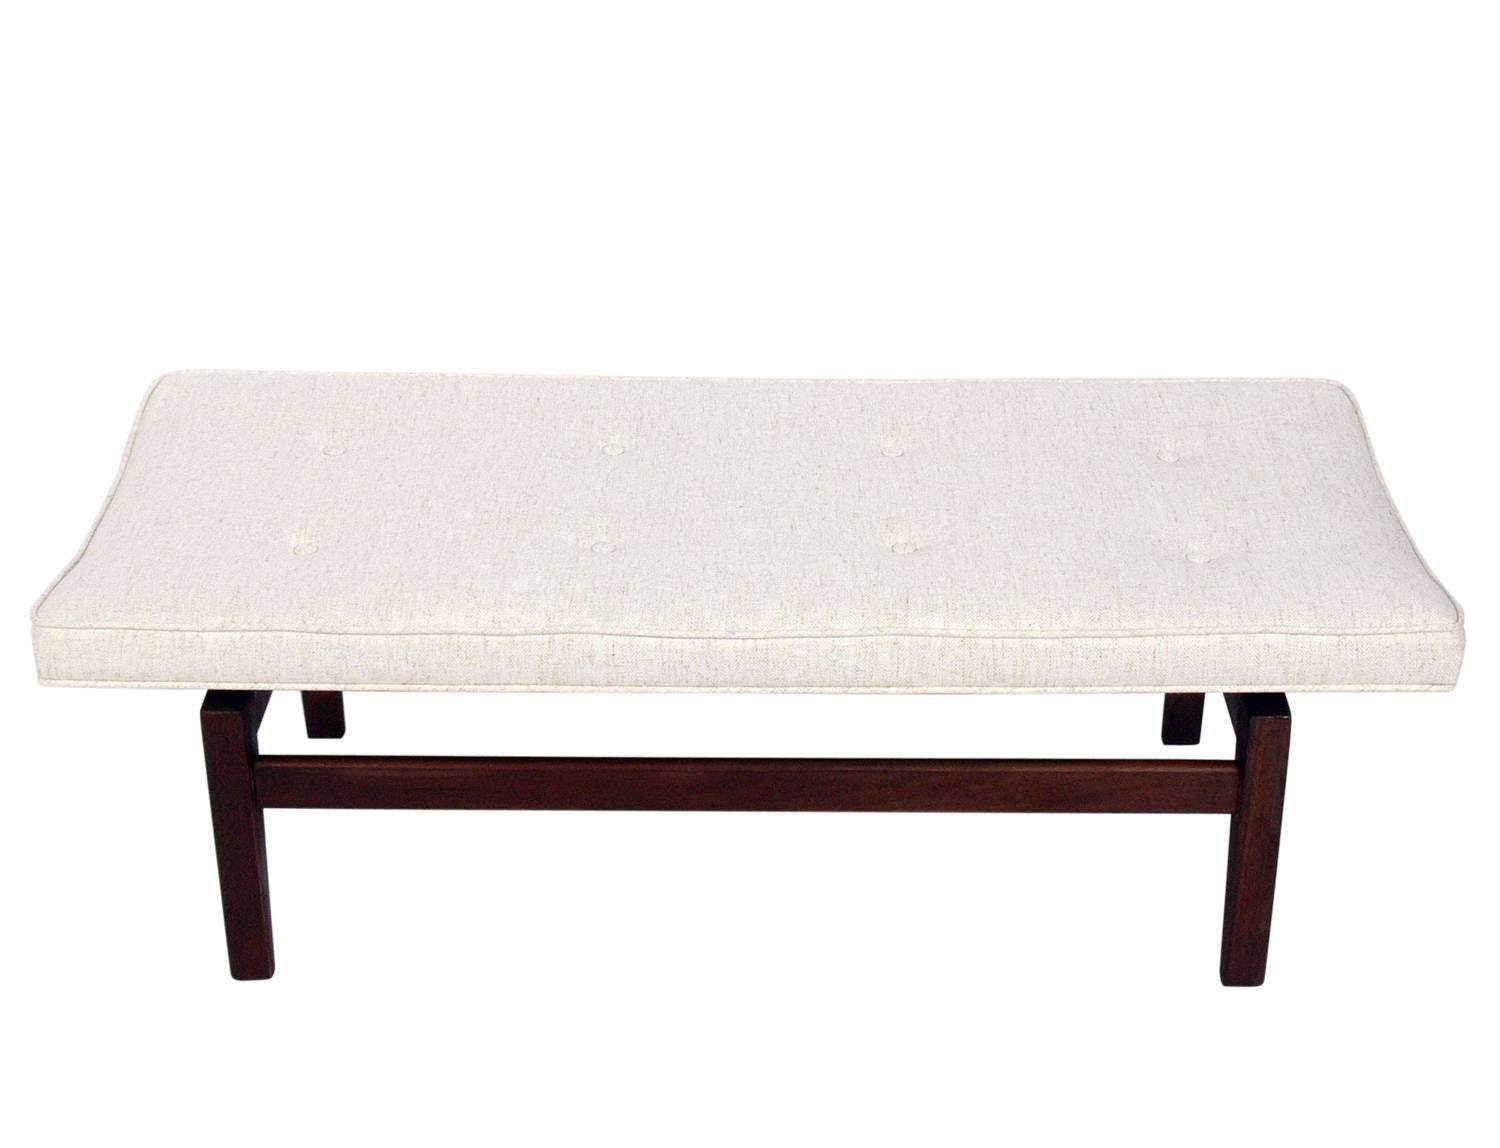 Clean lined walnut bench, designed by Jens Risom, American, circa 1950s. The simple architectural design appears to float the seat over the base. It is a versatile size and would be perfect at the end of the bed, or as occasional seating in a living